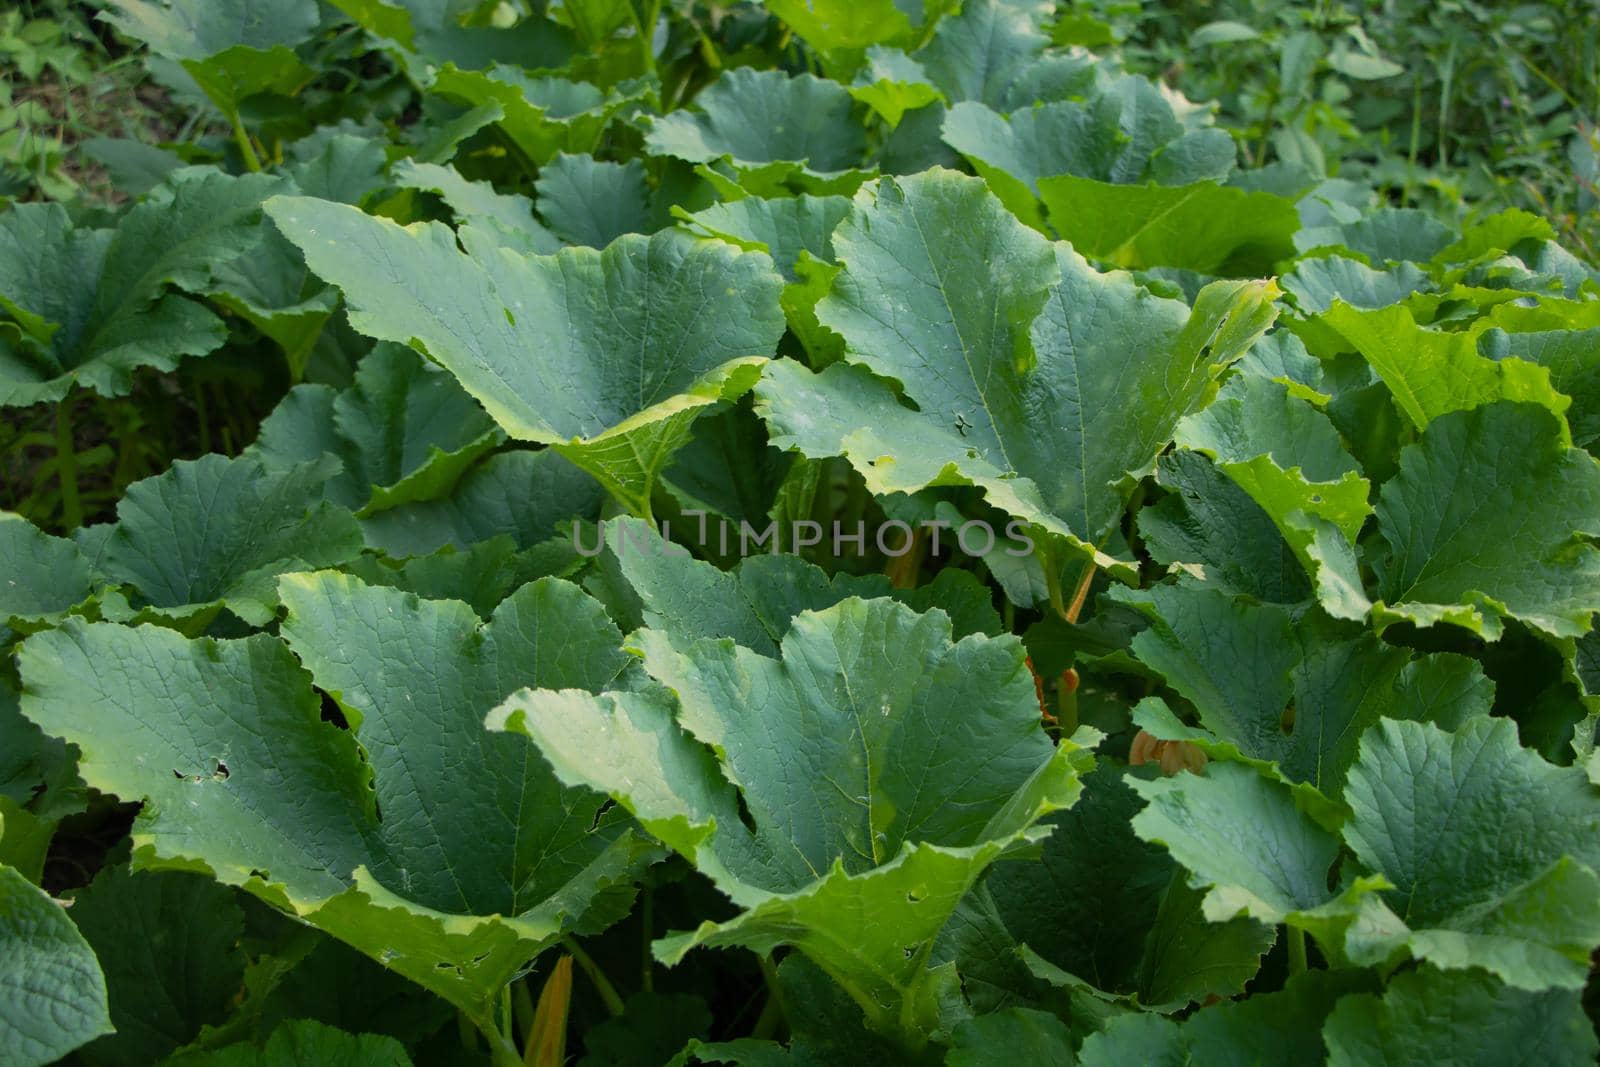 Pumpkin leaves, the plant grows vigorously in the garden.